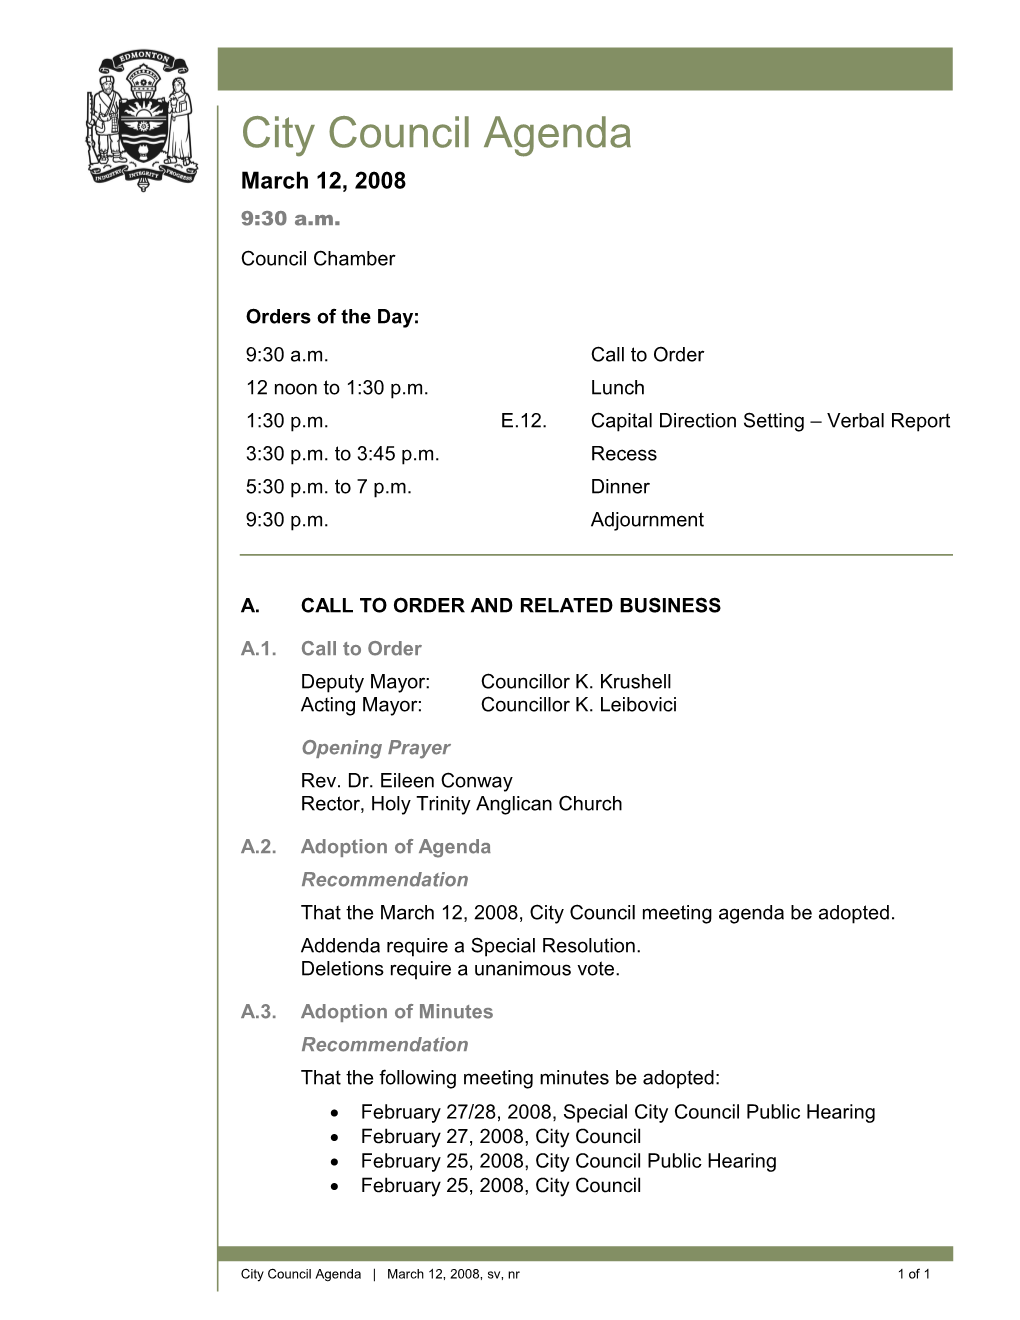 Agenda for City Council March 12, 2008 Meeting